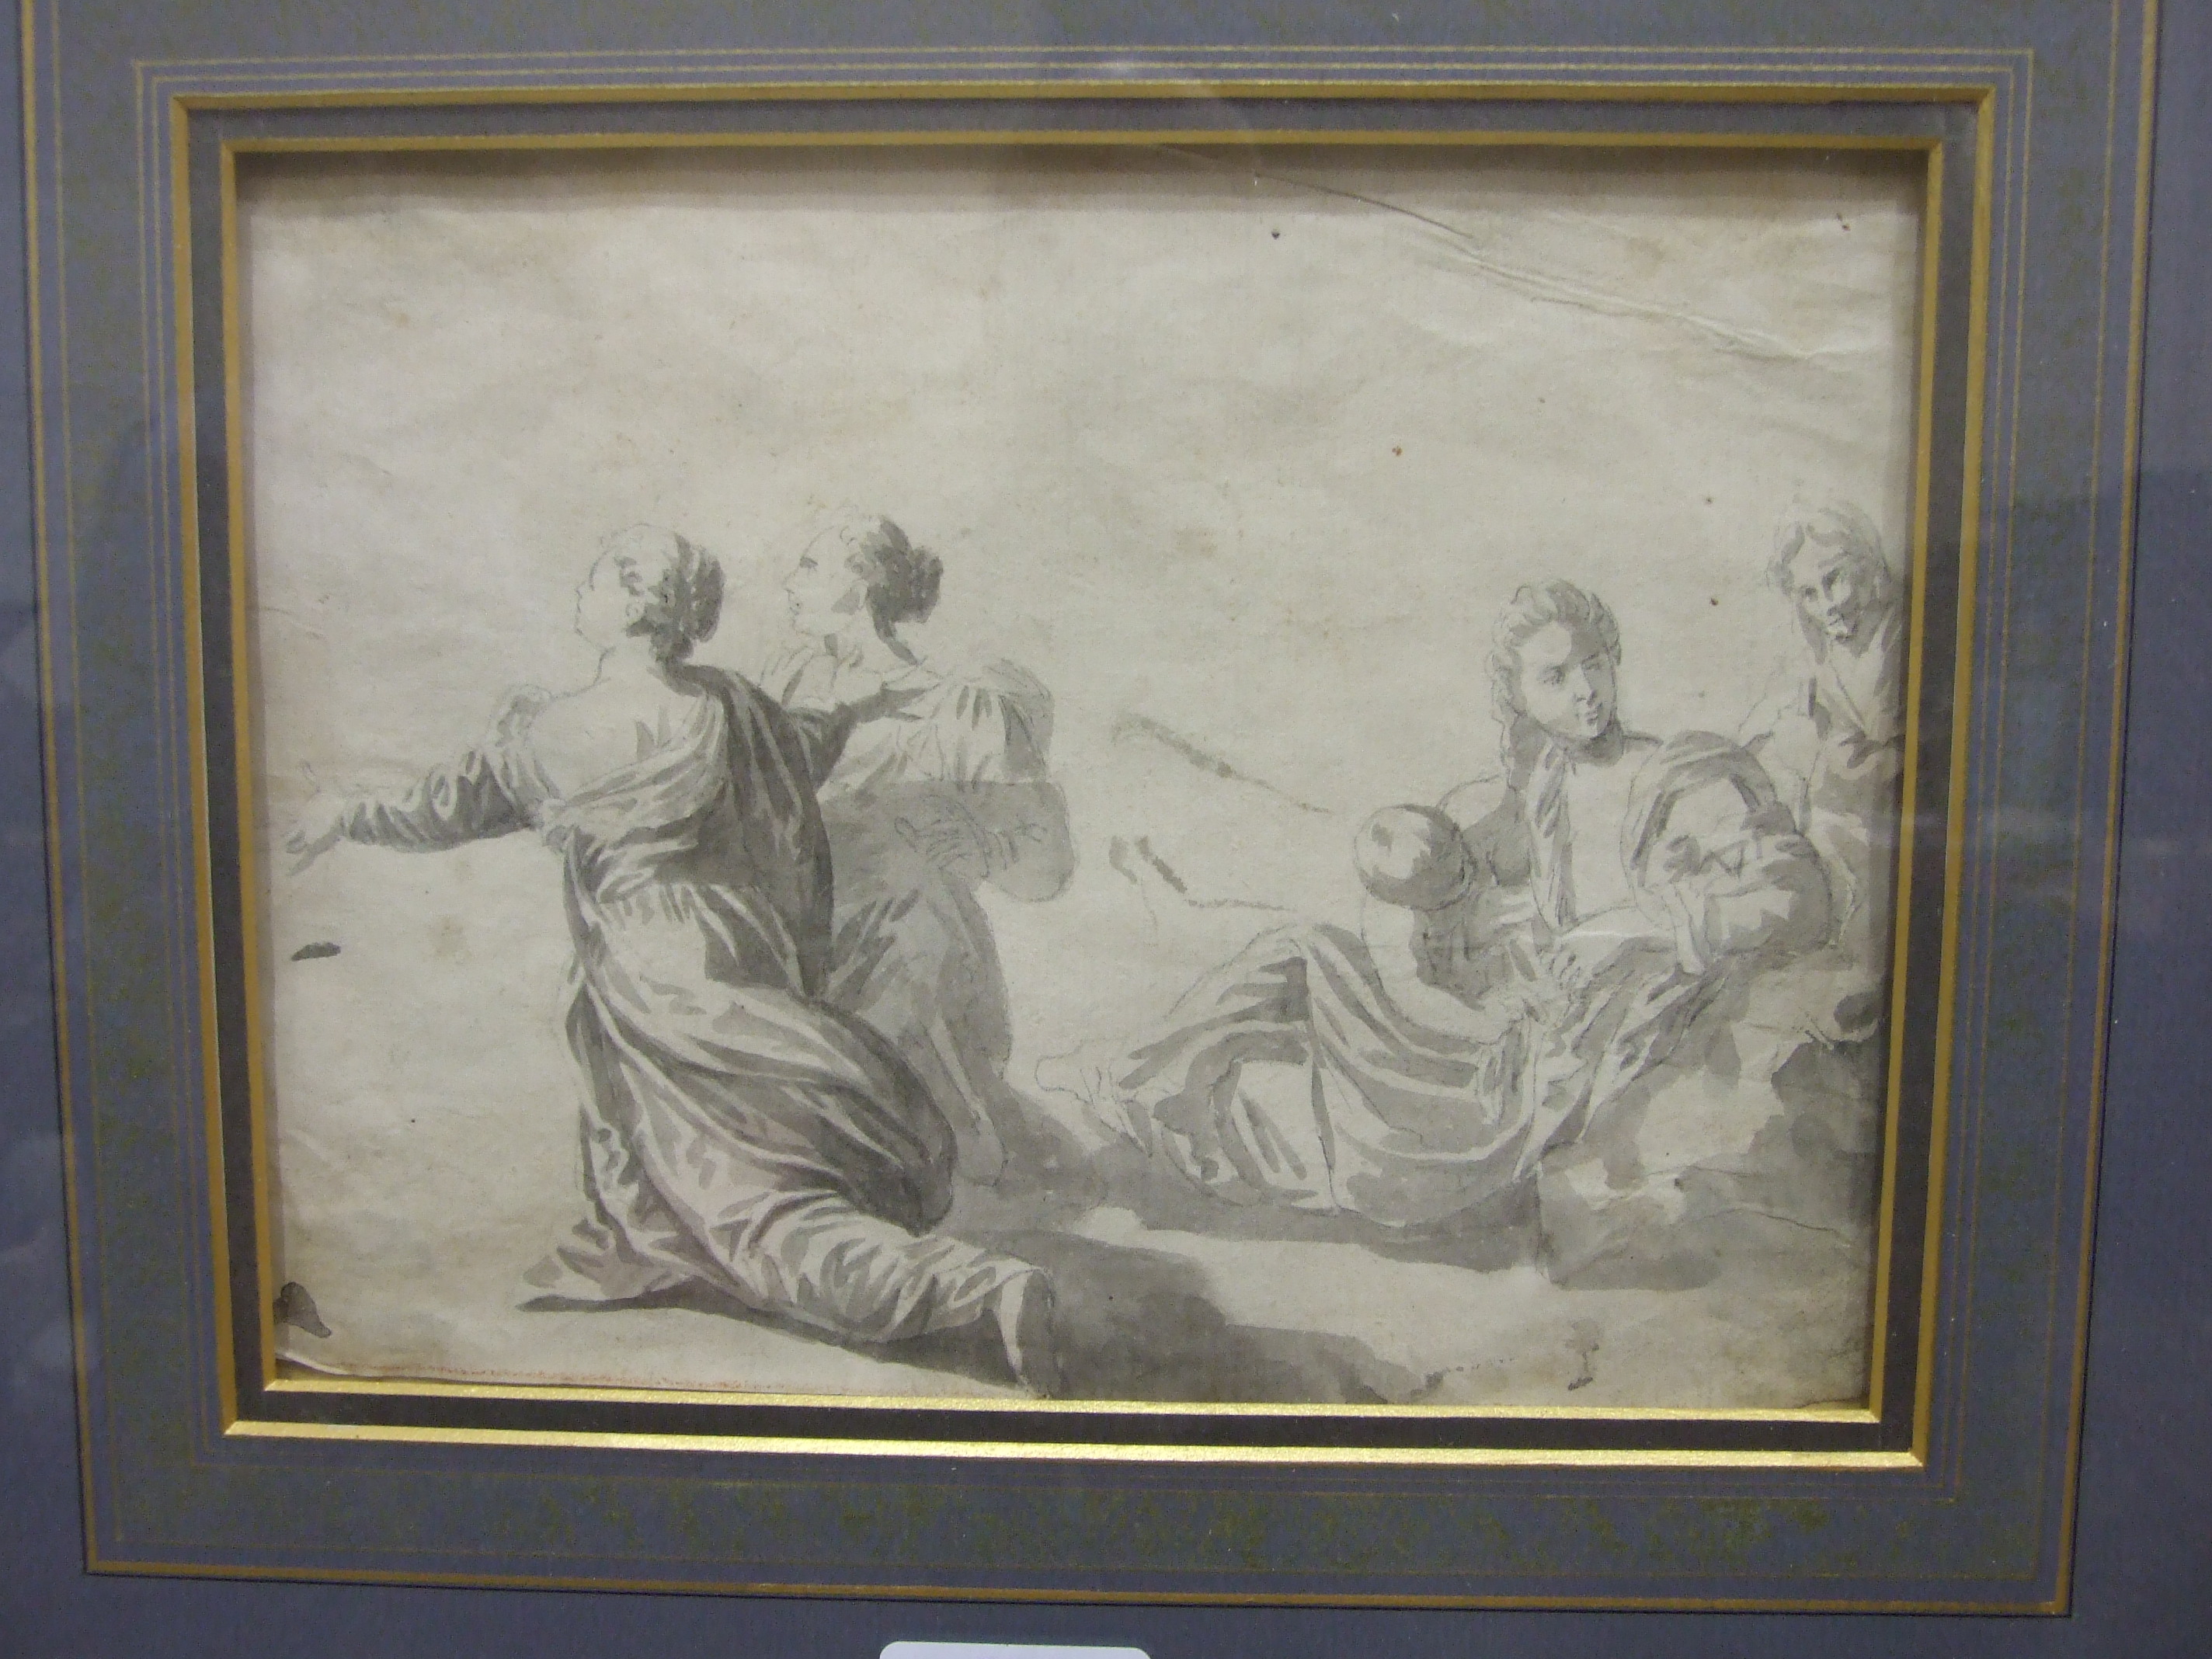 17th century Italian School MOTHER AND CHILD WITH THREE ATTENDANT FIGURES Unsigned wash sketch, 16 x